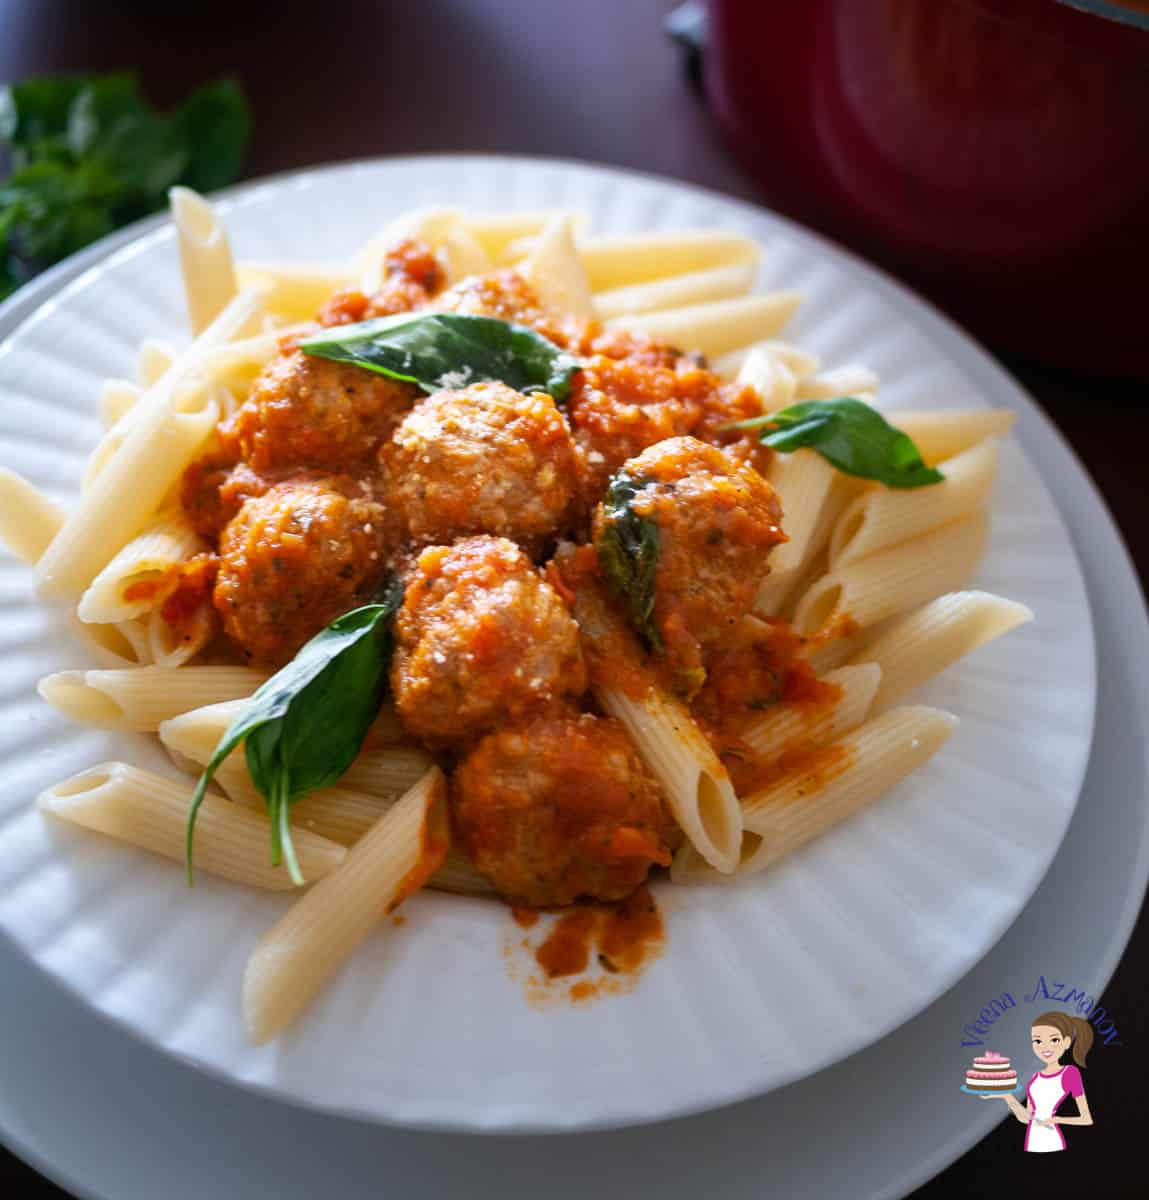 A plate of turkey meatballs with penne pasta.